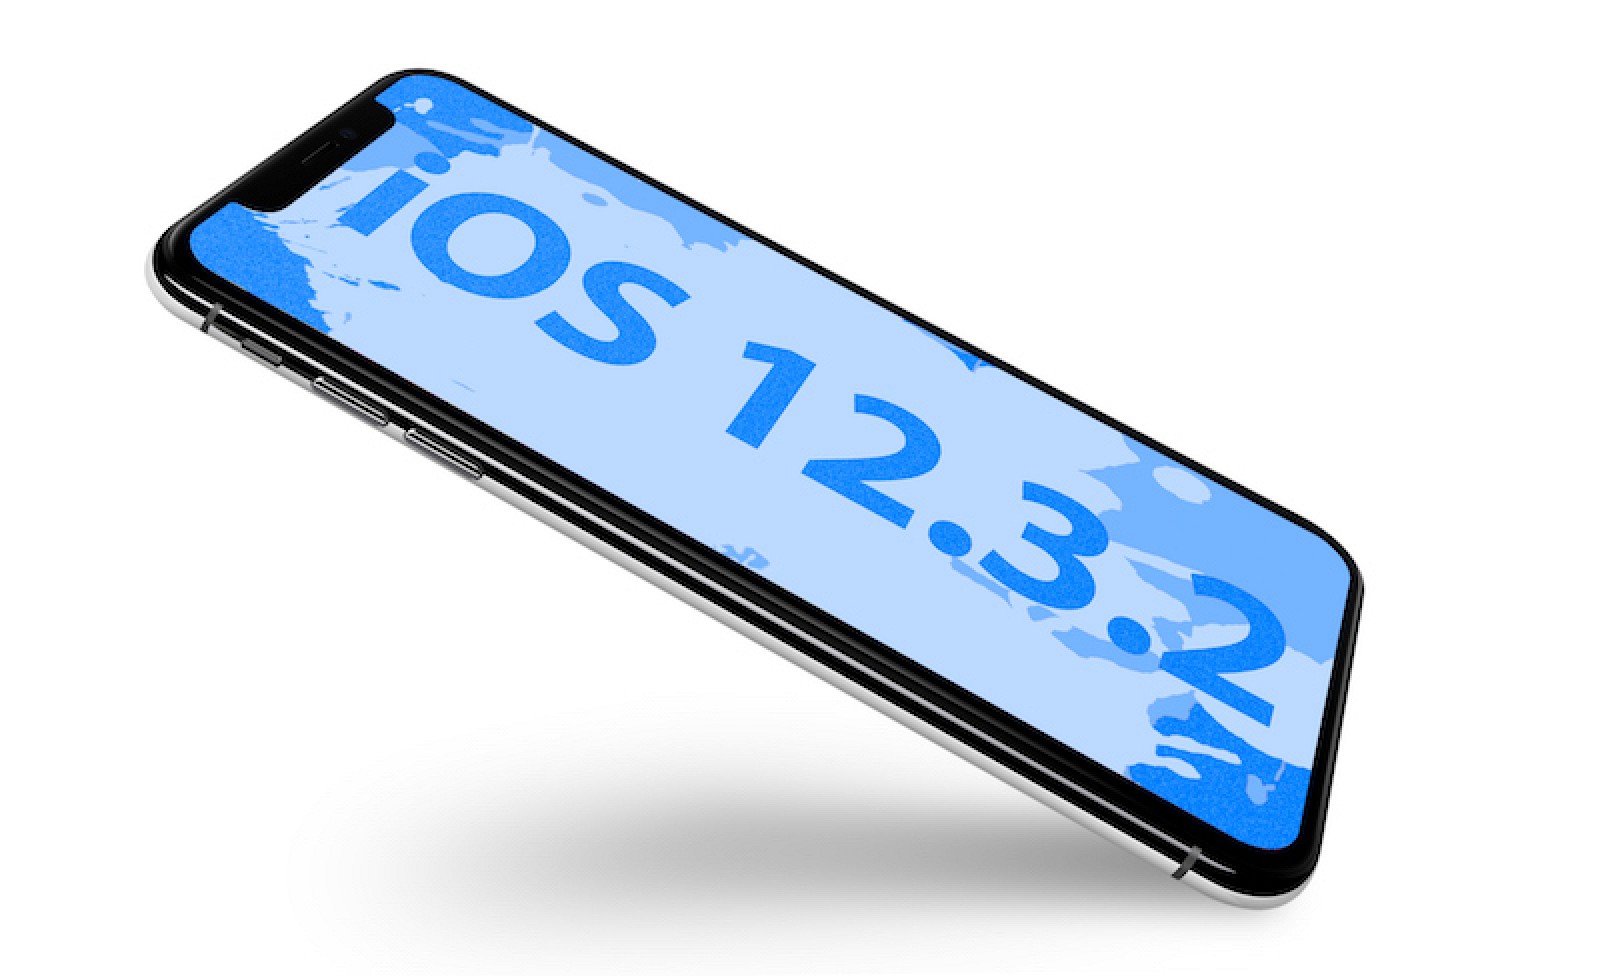 Apple Releases iOS 12.3.2 With Portrait Mode Fix on iPhone 8 Plus - Mac Rumors thumbnail